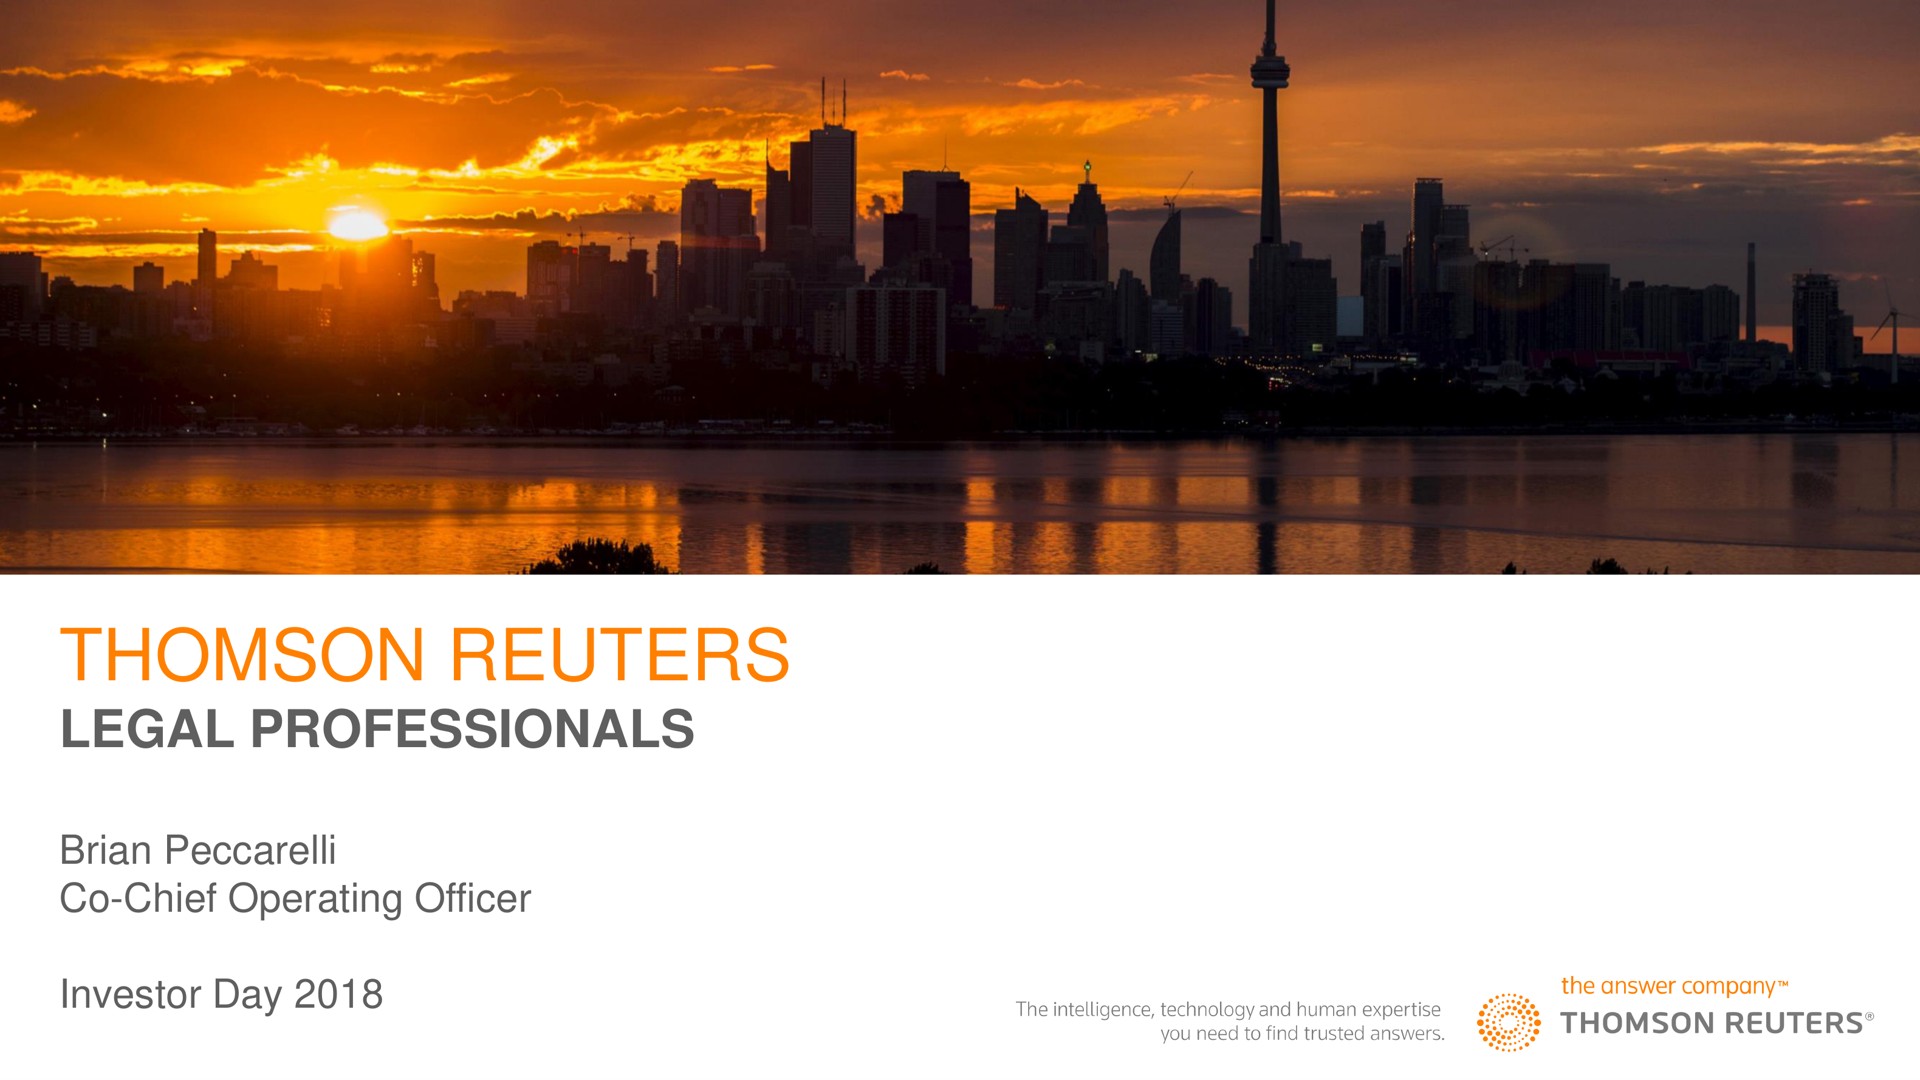 legal professionals chief operating officer investor day | Thomson Reuters